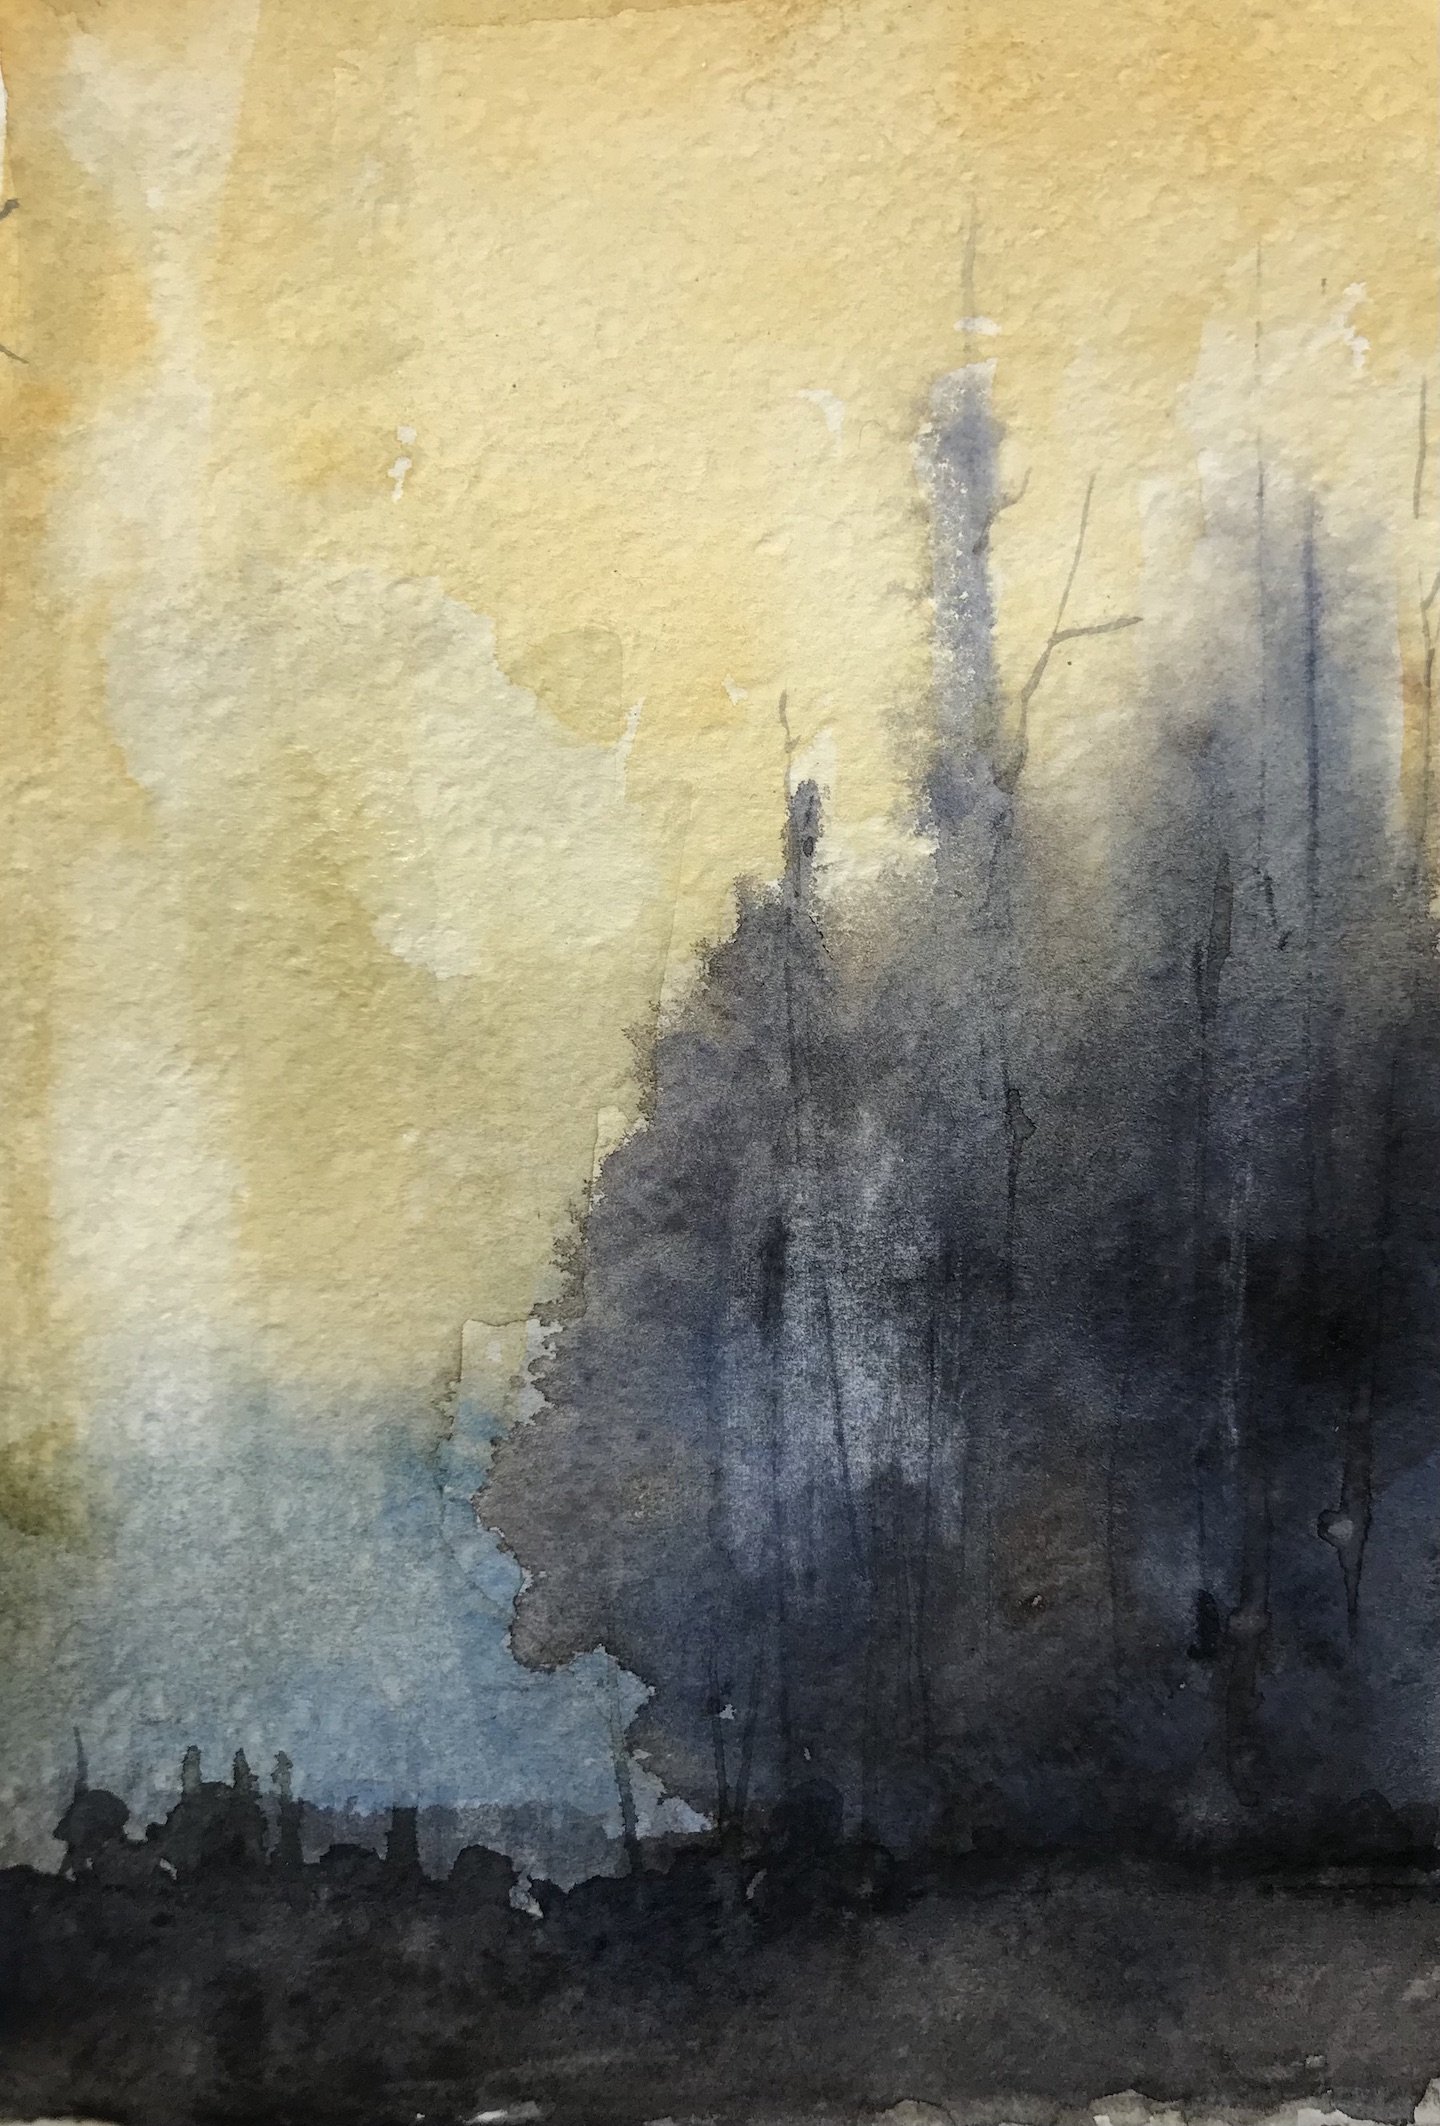     Misty Forest  , 10” x 7”, watercolor on paper 